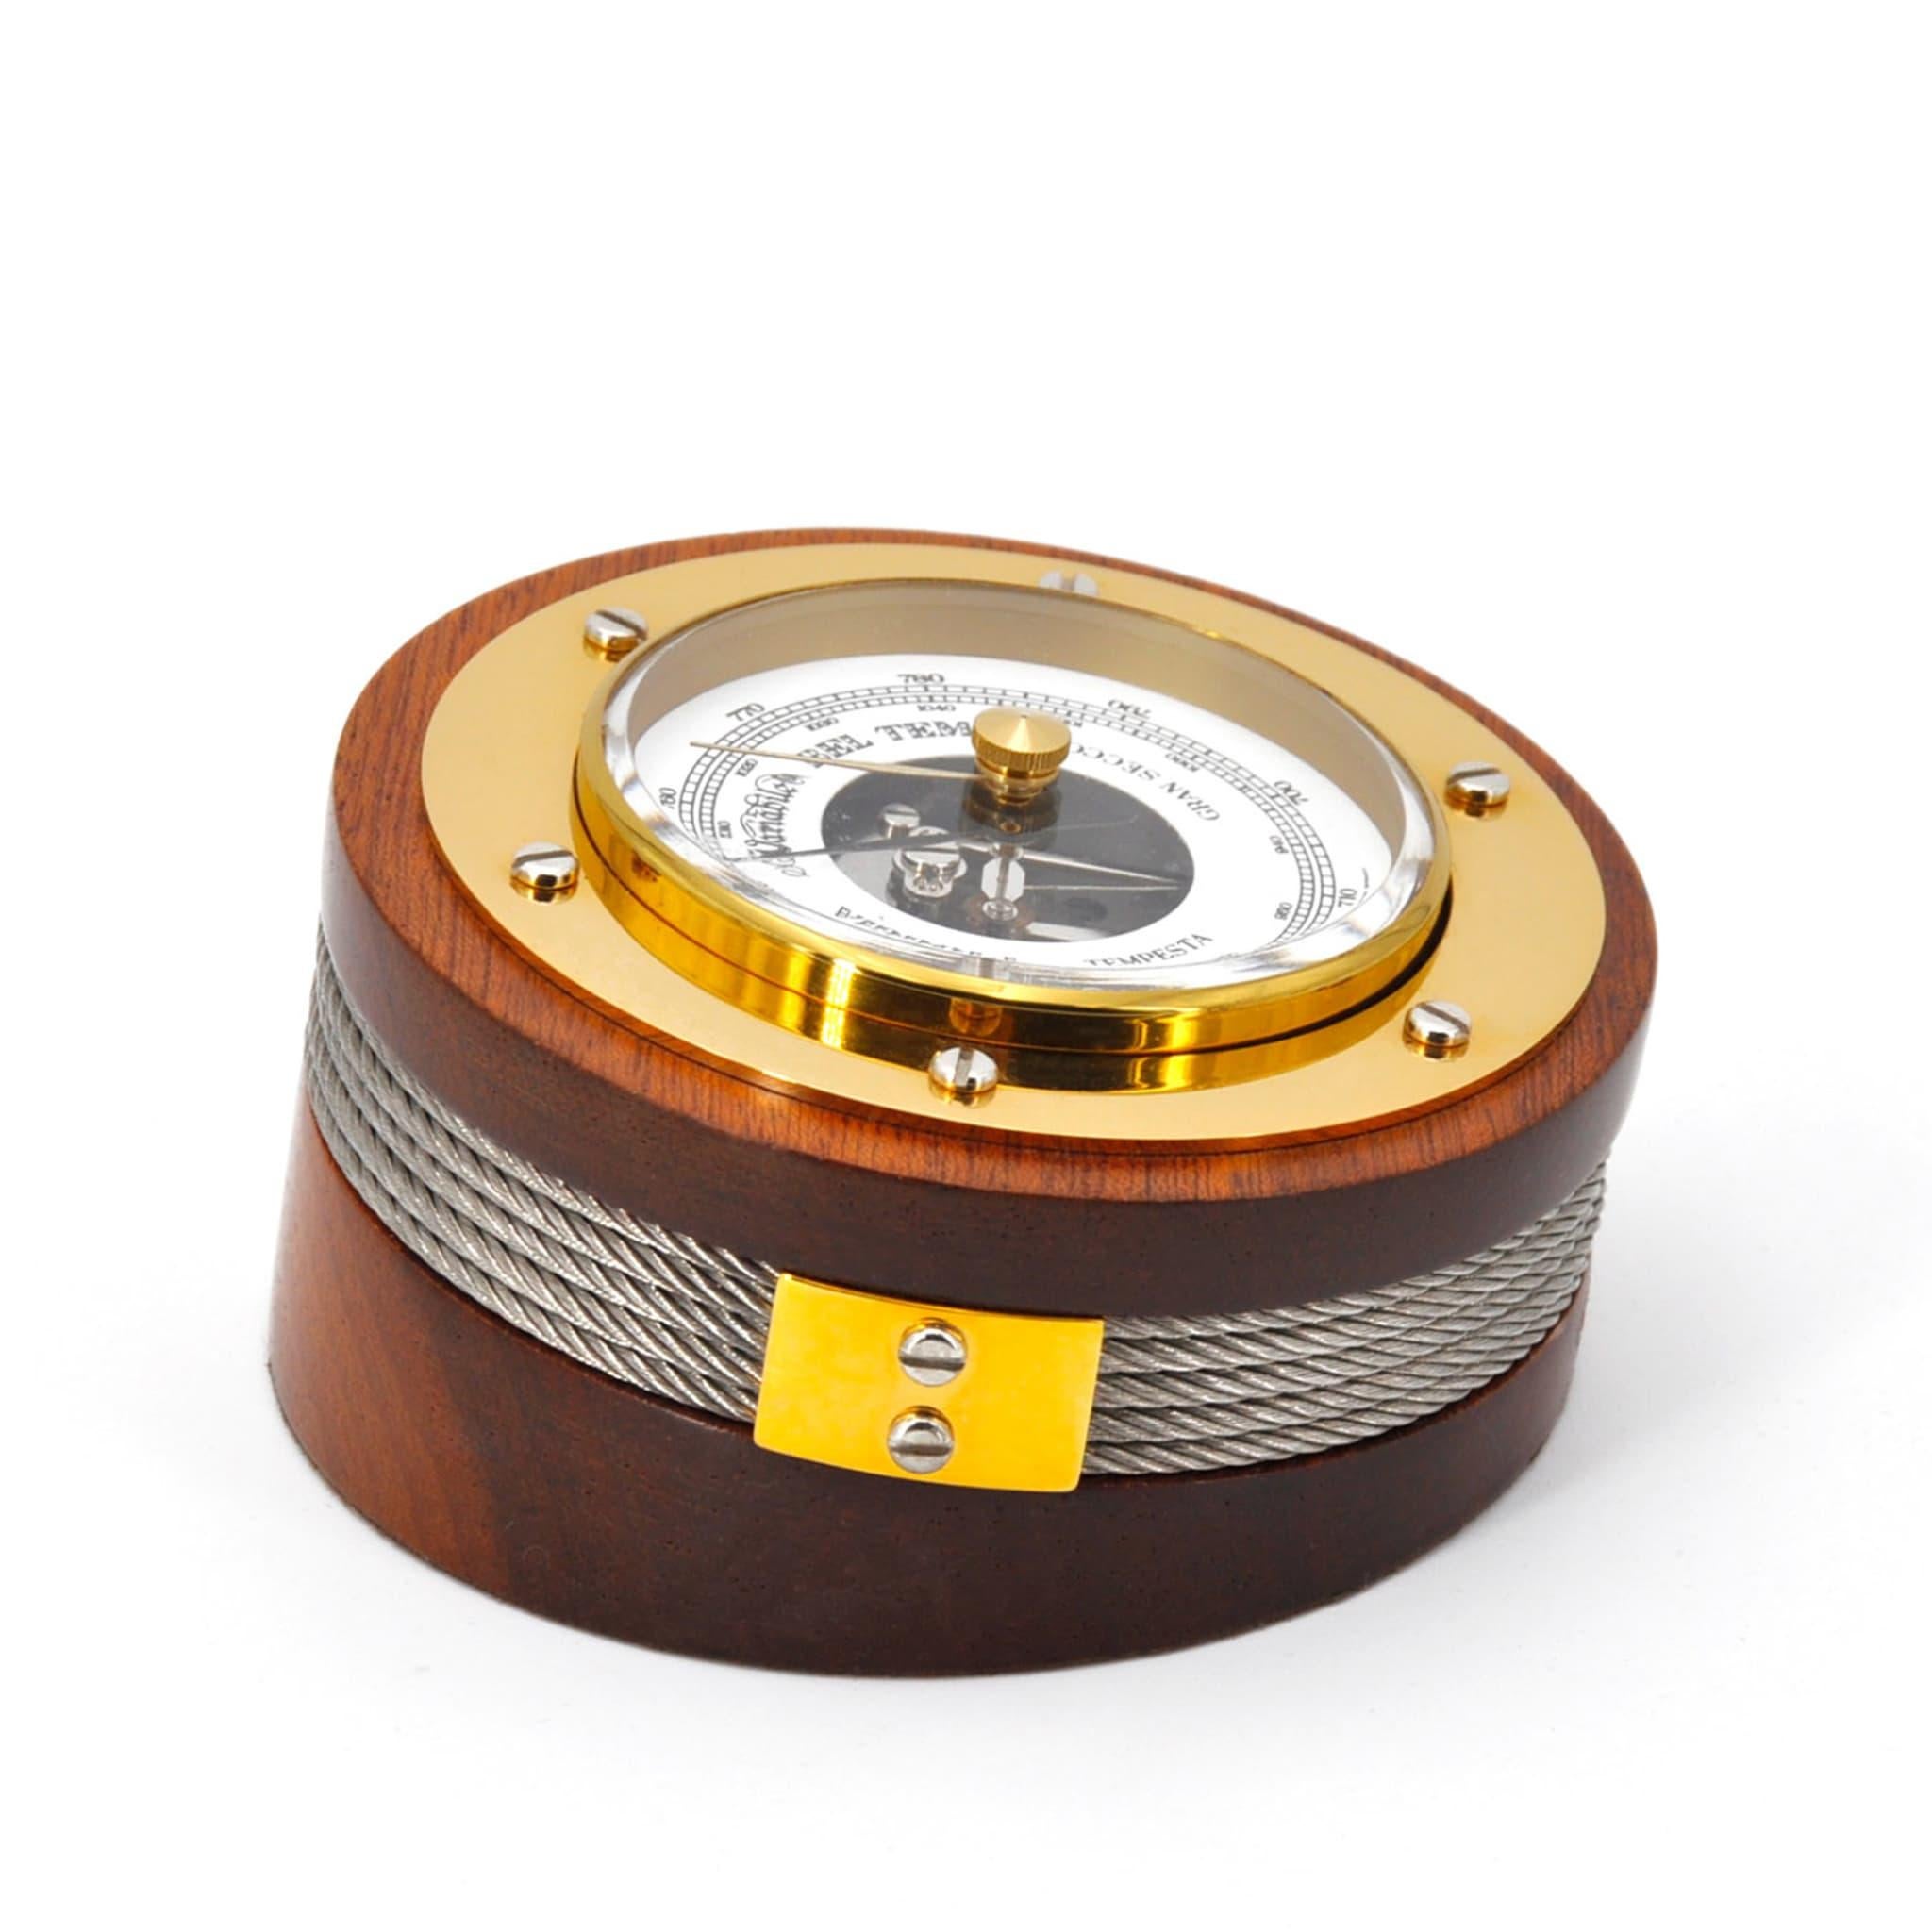 Part of the Ritmi Marini Collection designed by artist Nino Basso, this barometer is a timeless classic of refined Nautical-inspired style. Handcrafted of mahogany wood enriched with 24K gold plated-brass details and a stainless steel cord, it comes